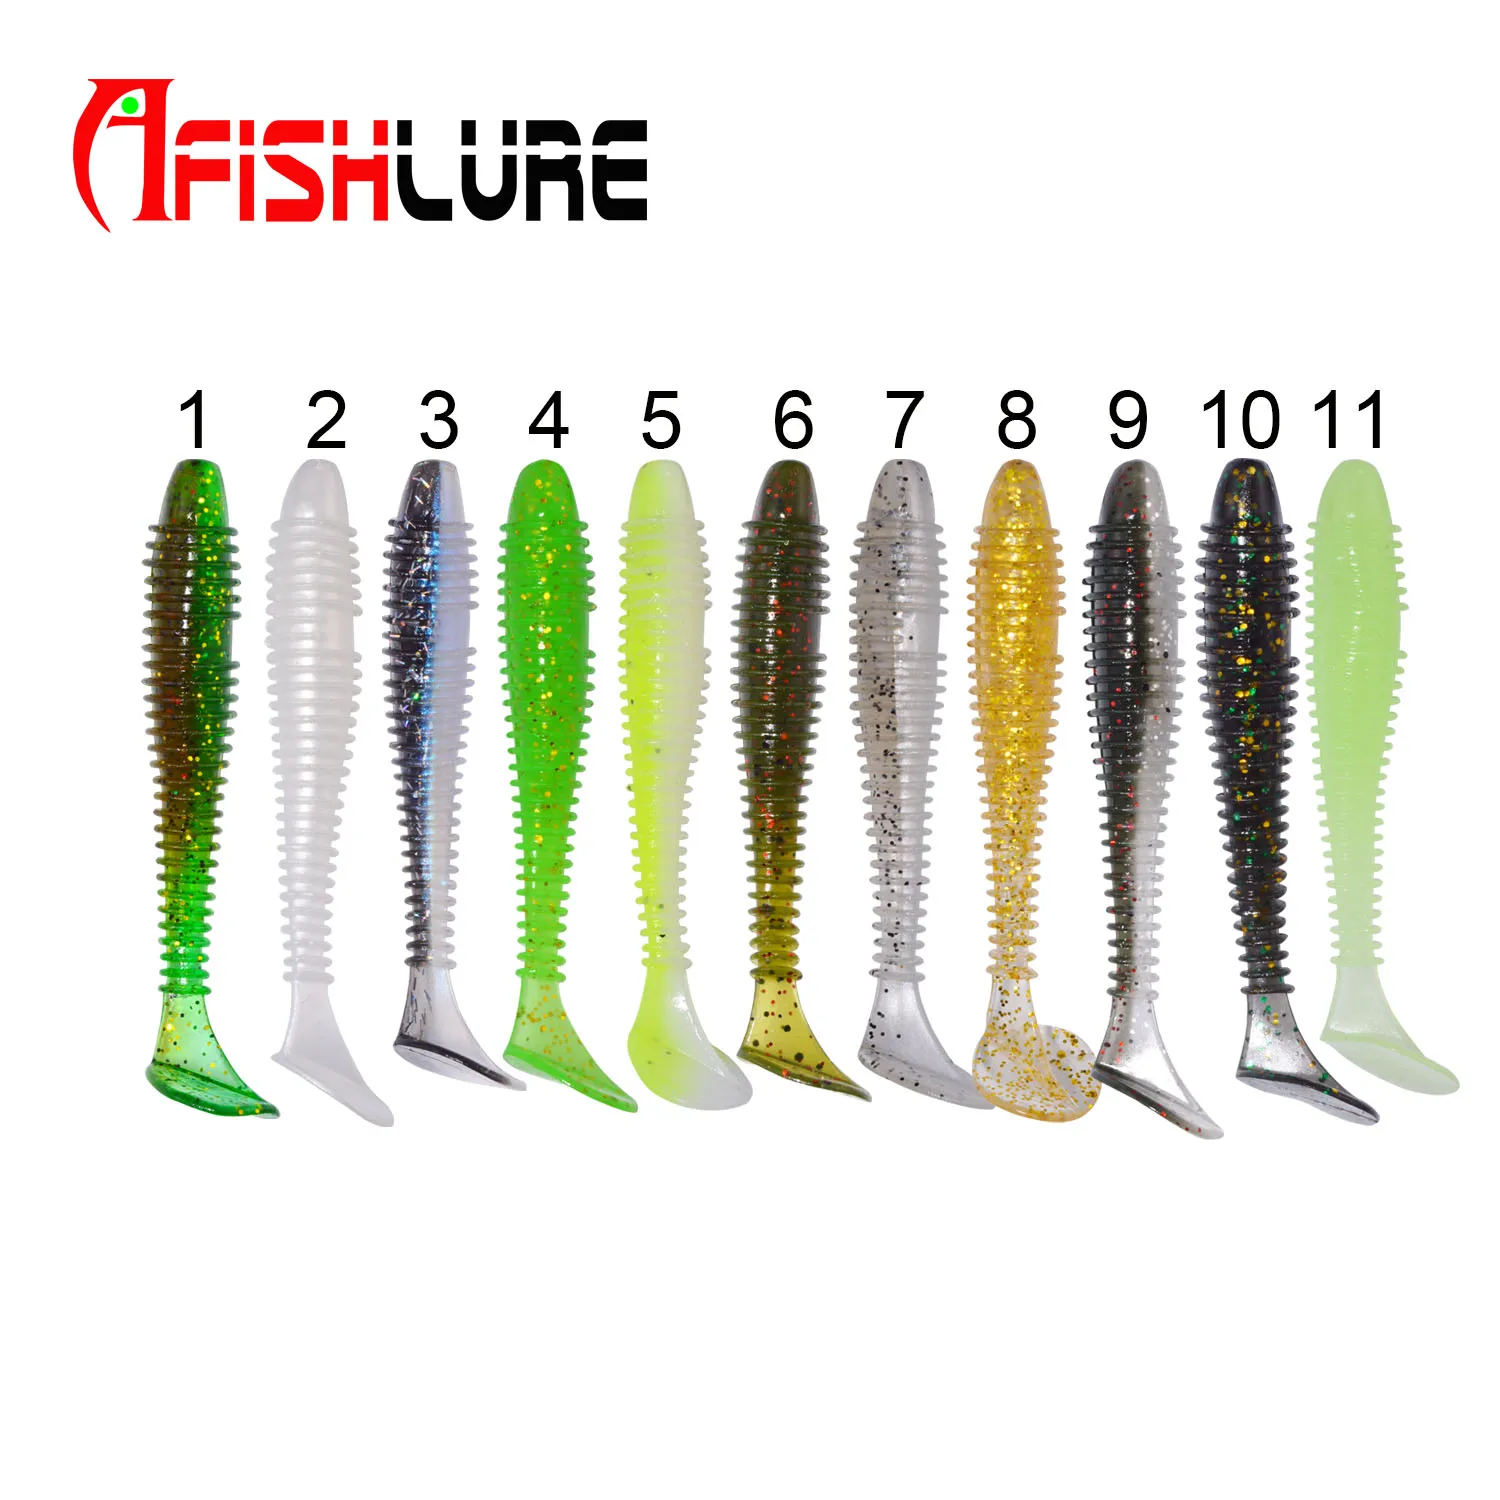 

Afishlure t tail soft bait 55mm 1.45g Shad lure Artificial Fishing Bait Worm Soft Lures Silicon Fishing bait, 11colors